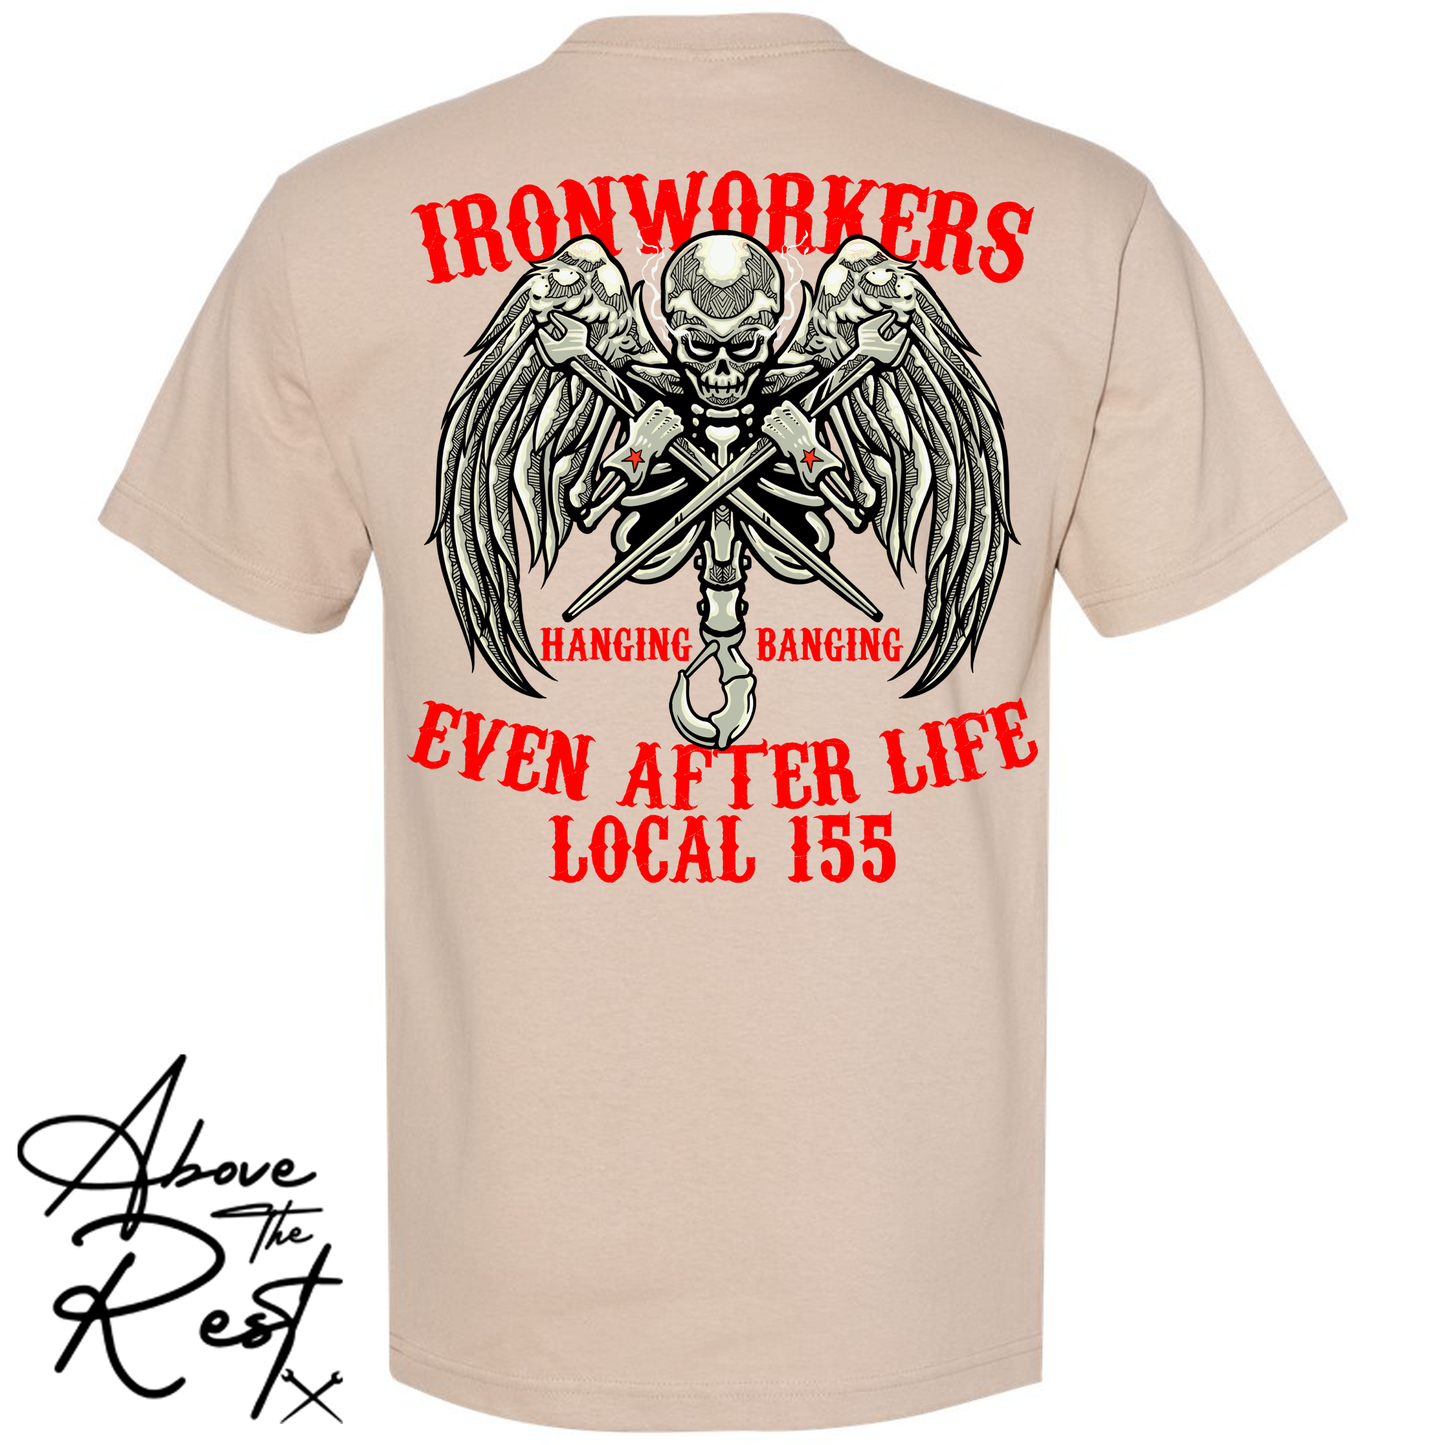 EVEN AFTER LIFE LOCAL 155 T-SHIRT